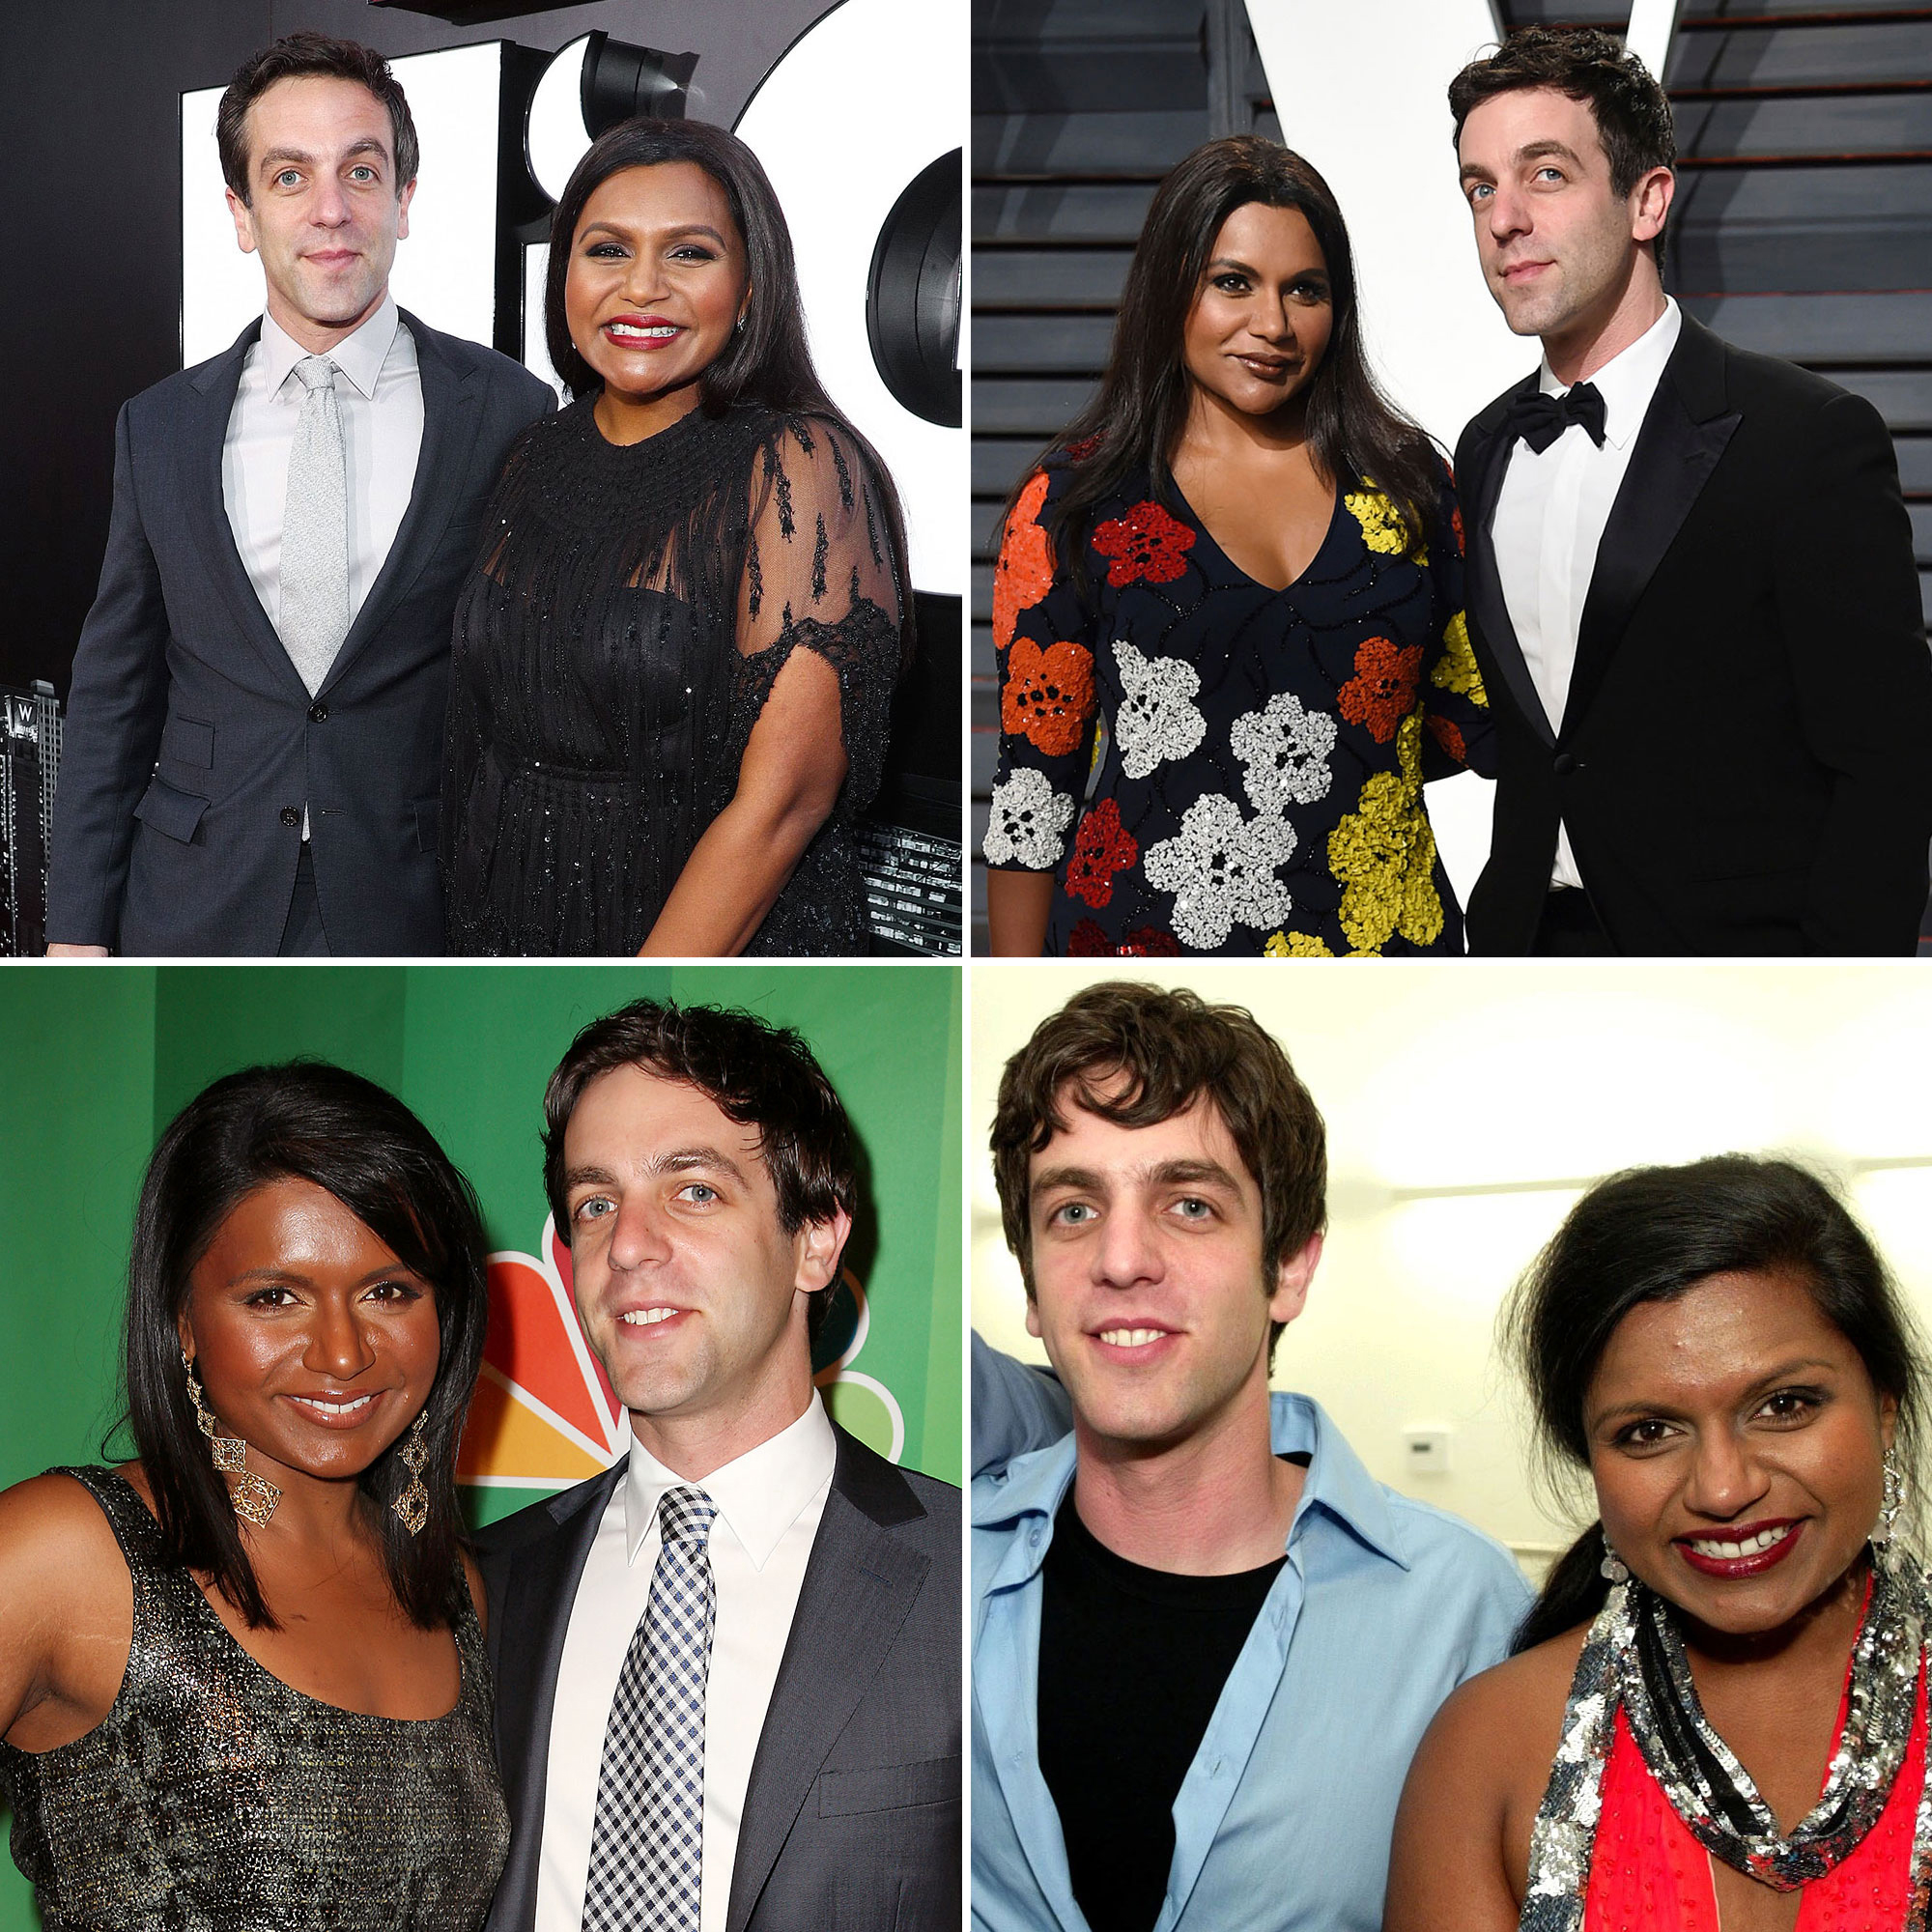 Katy Perry Blowjob - Mindy Kaling and BJ Novak's Inseparable Friendship: A Timeline